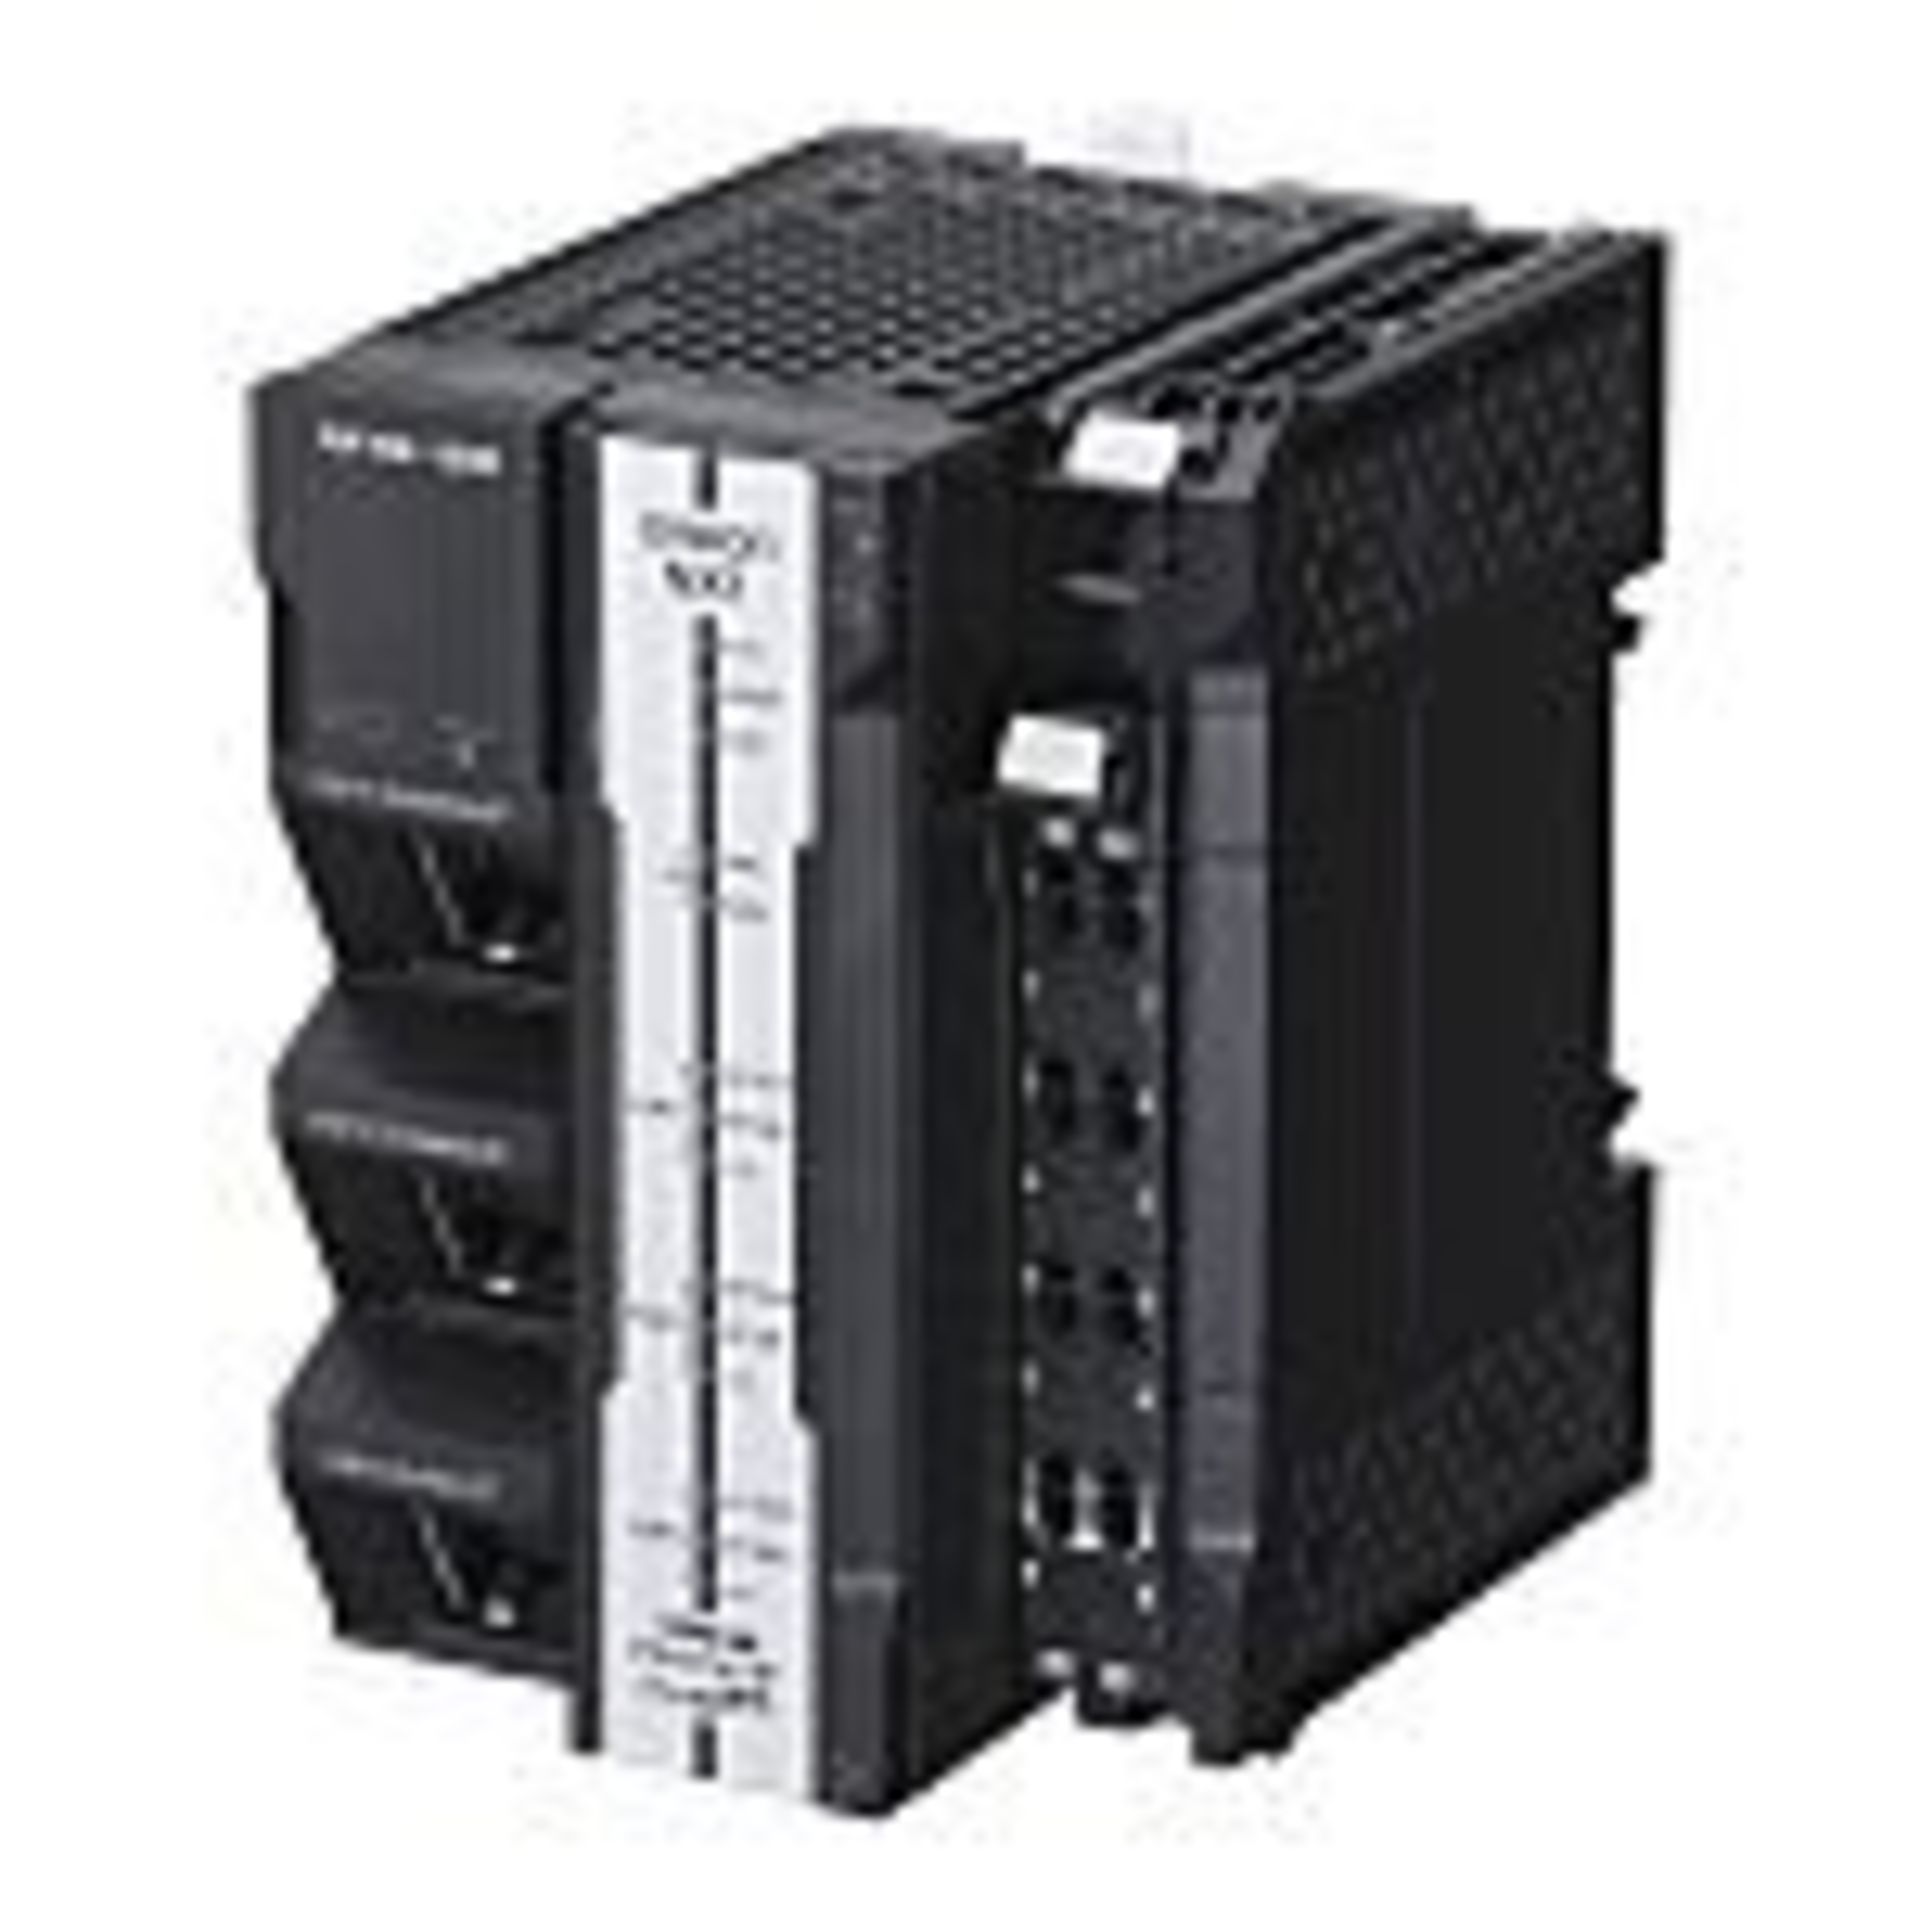 Omron NX PLC CPU, EtherCAT, EtherNet/IP Networking, Ethernet Interface